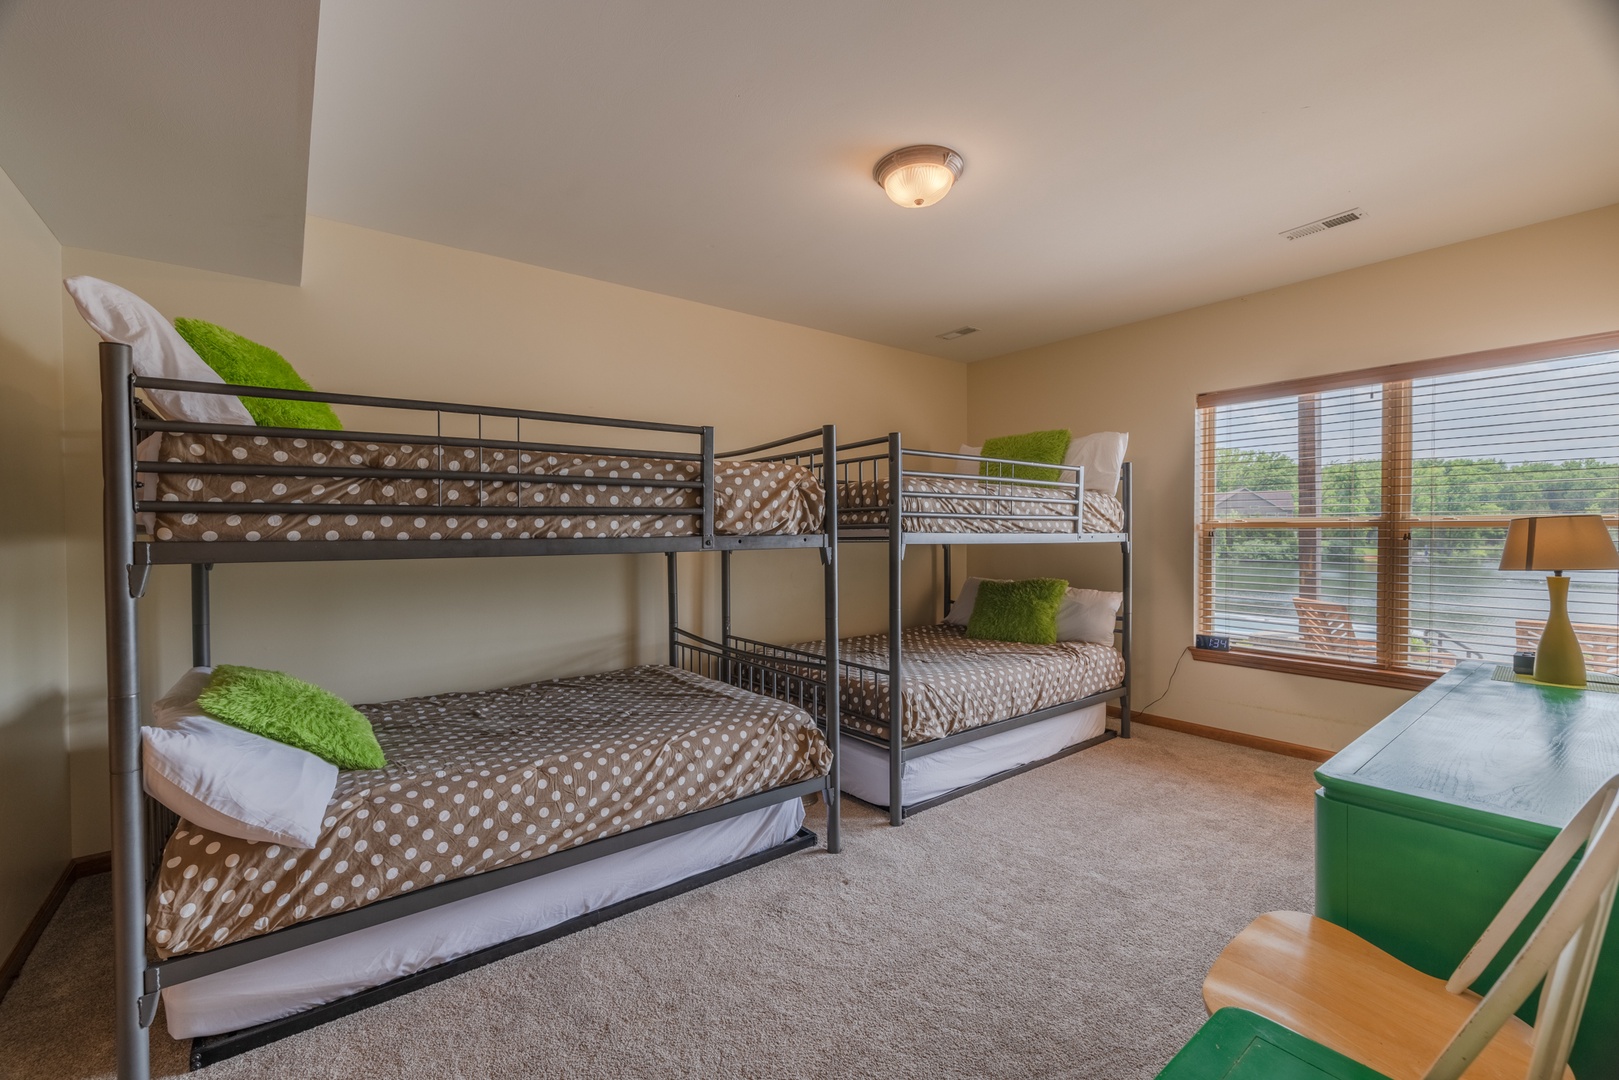 Bedroom 5 - The bunk room provides the ultimate sleepover space! Sleep in comfort on two twin beds, and four double beds